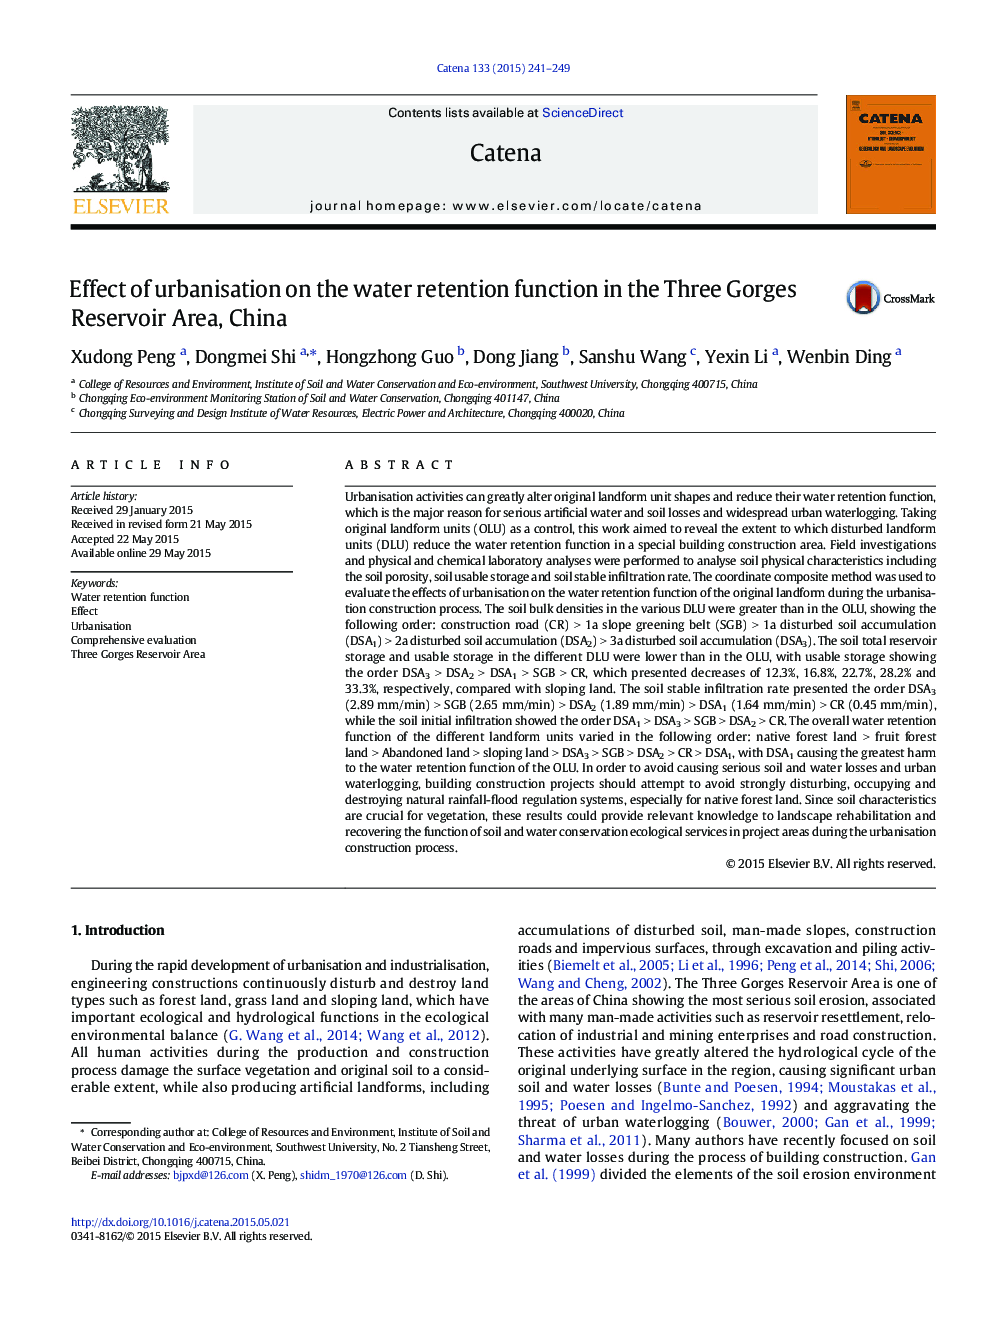 Effect of urbanisation on the water retention function in the Three Gorges Reservoir Area, China